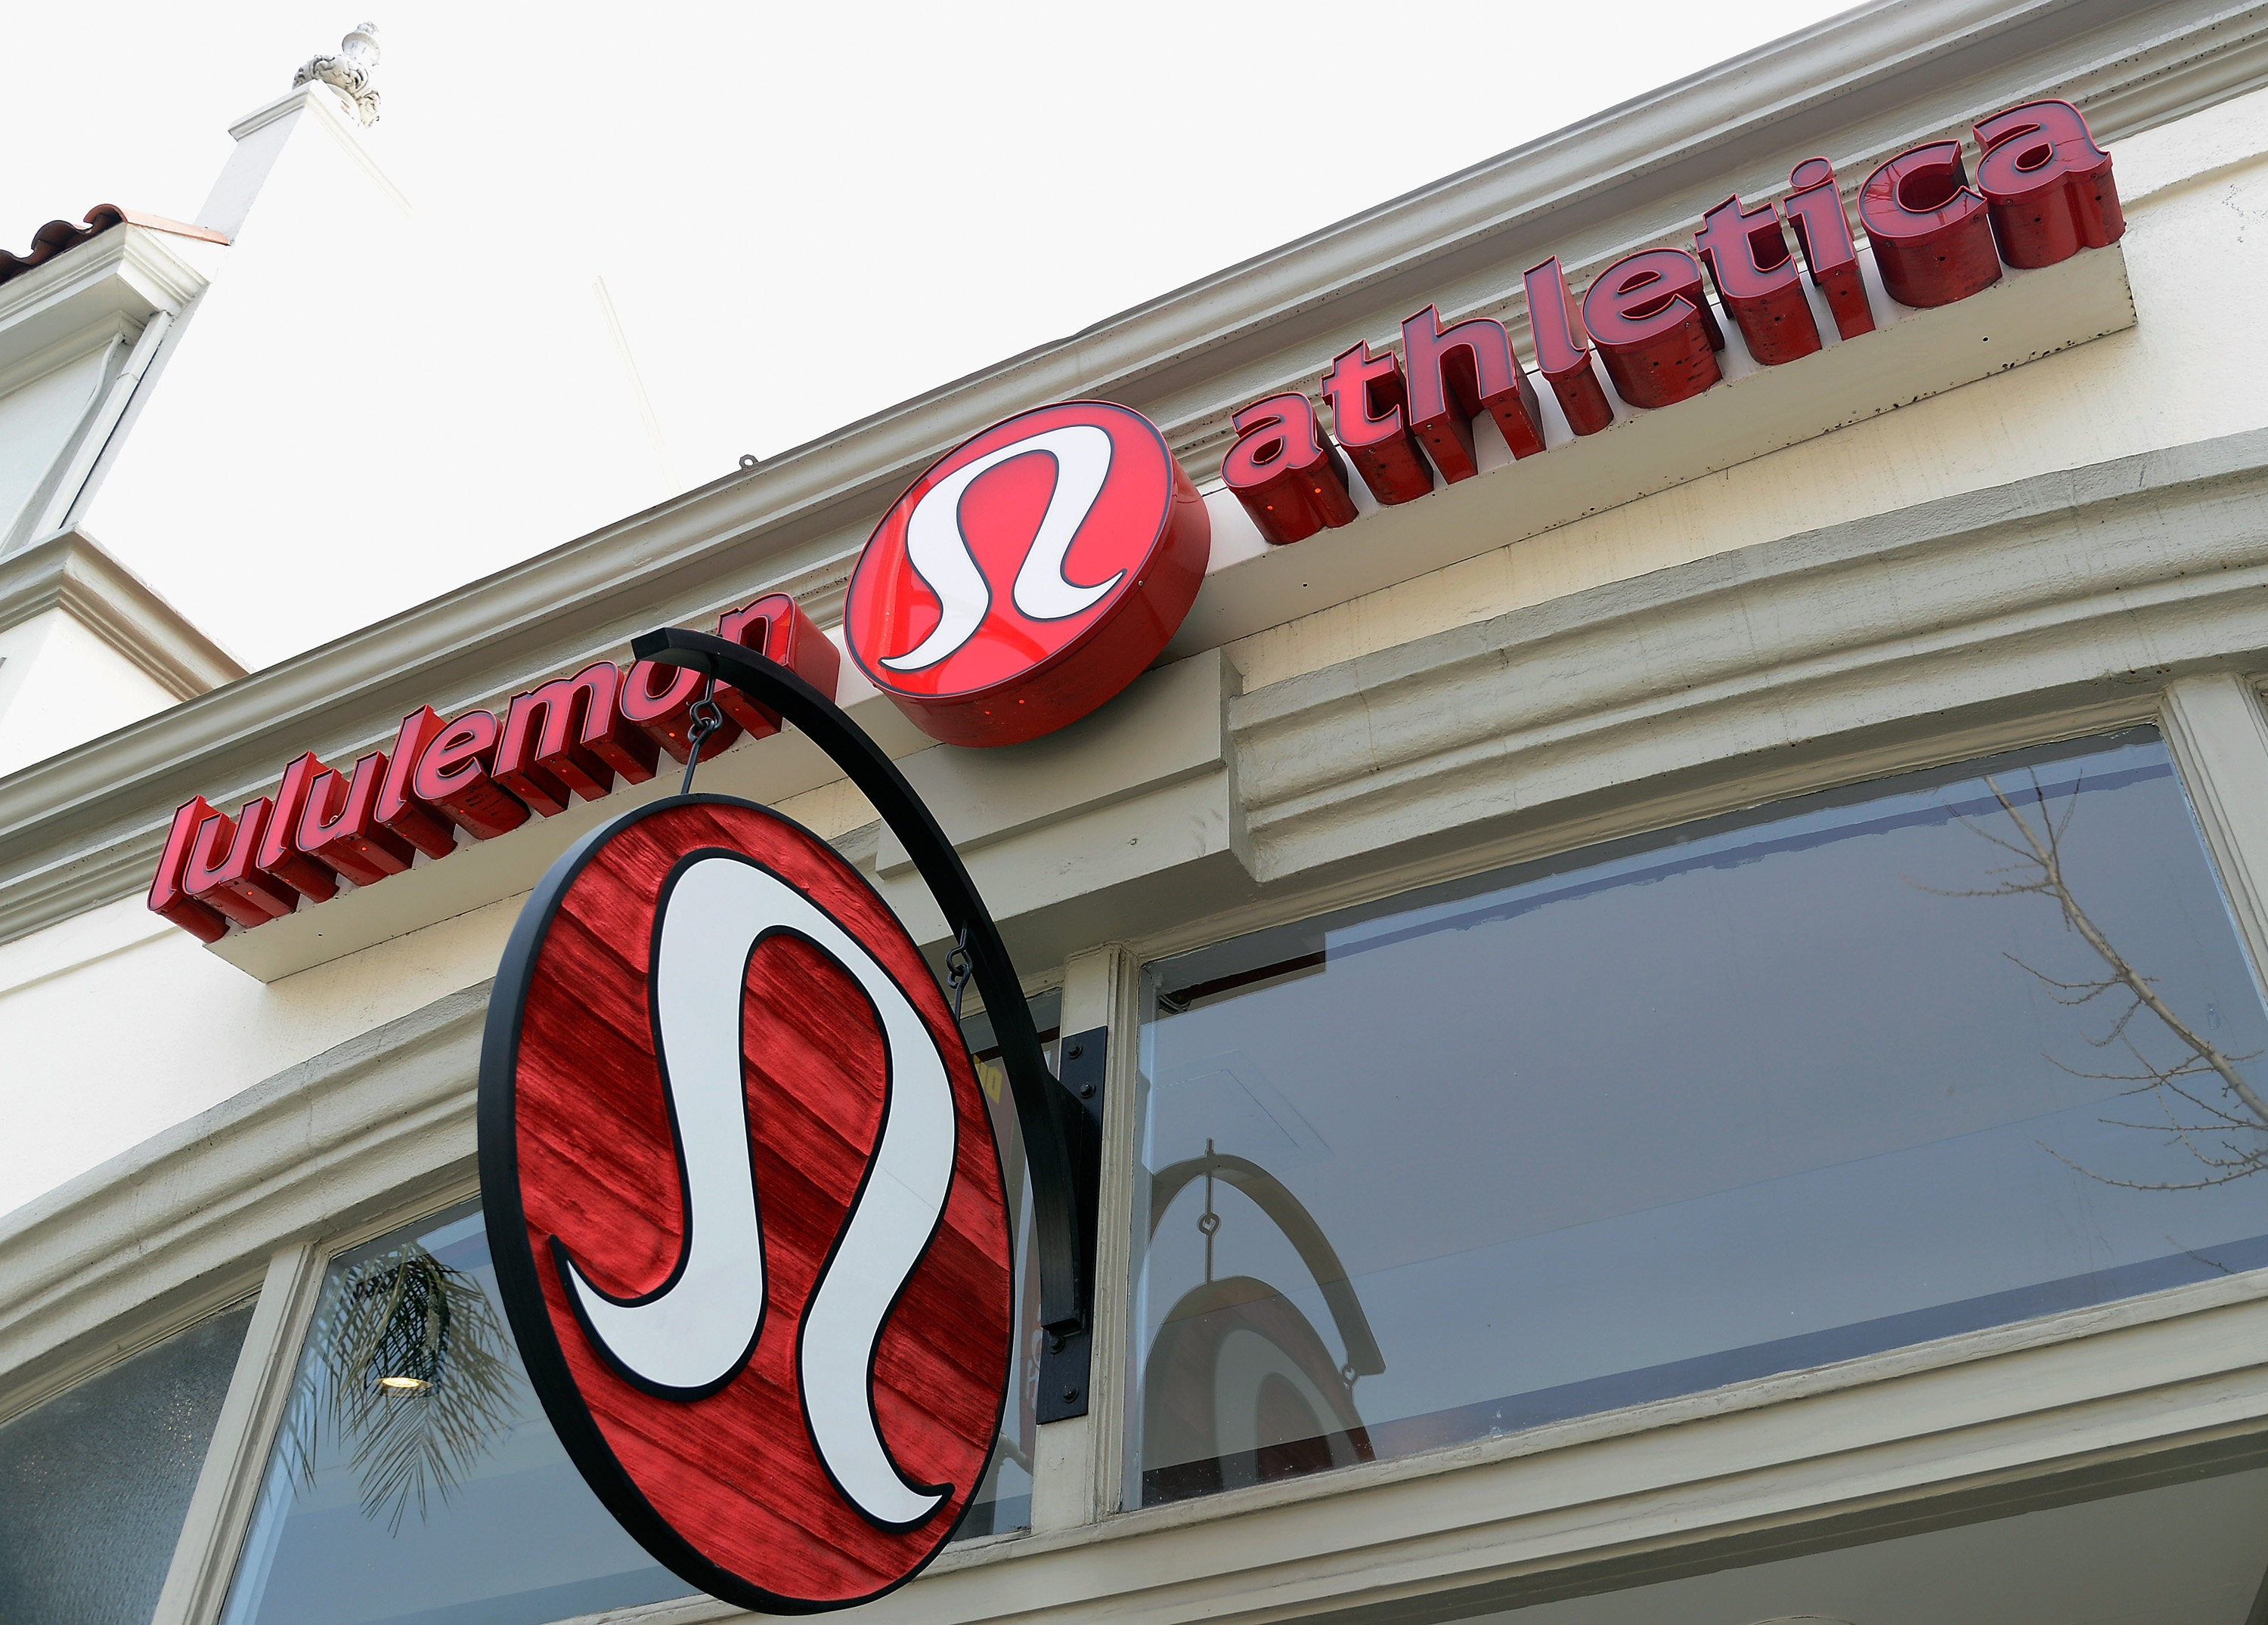 Under Armour is becoming a huge threat to Lululemon and Victoria's